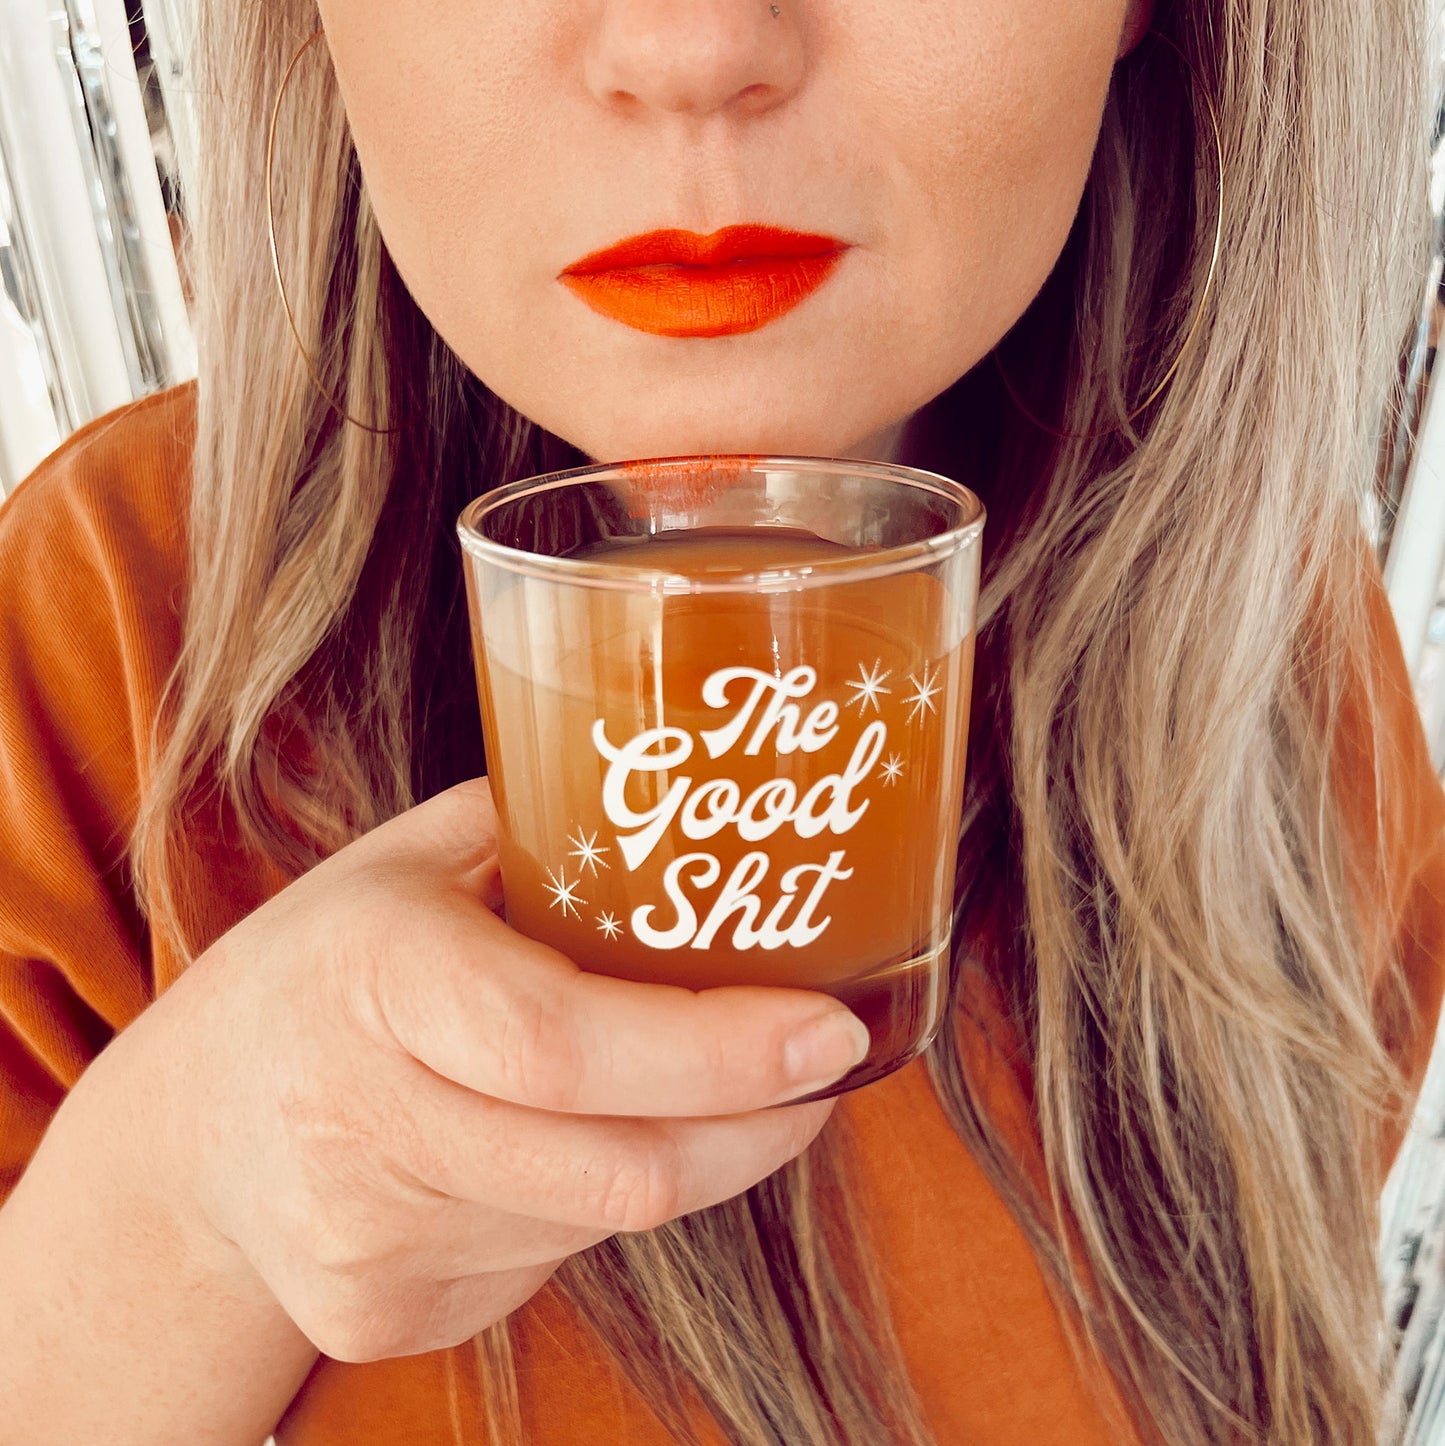 A photograph of a short glass tumbler with a thick bottom and "The Good Shit" printed across the center in white groovy cursive text.